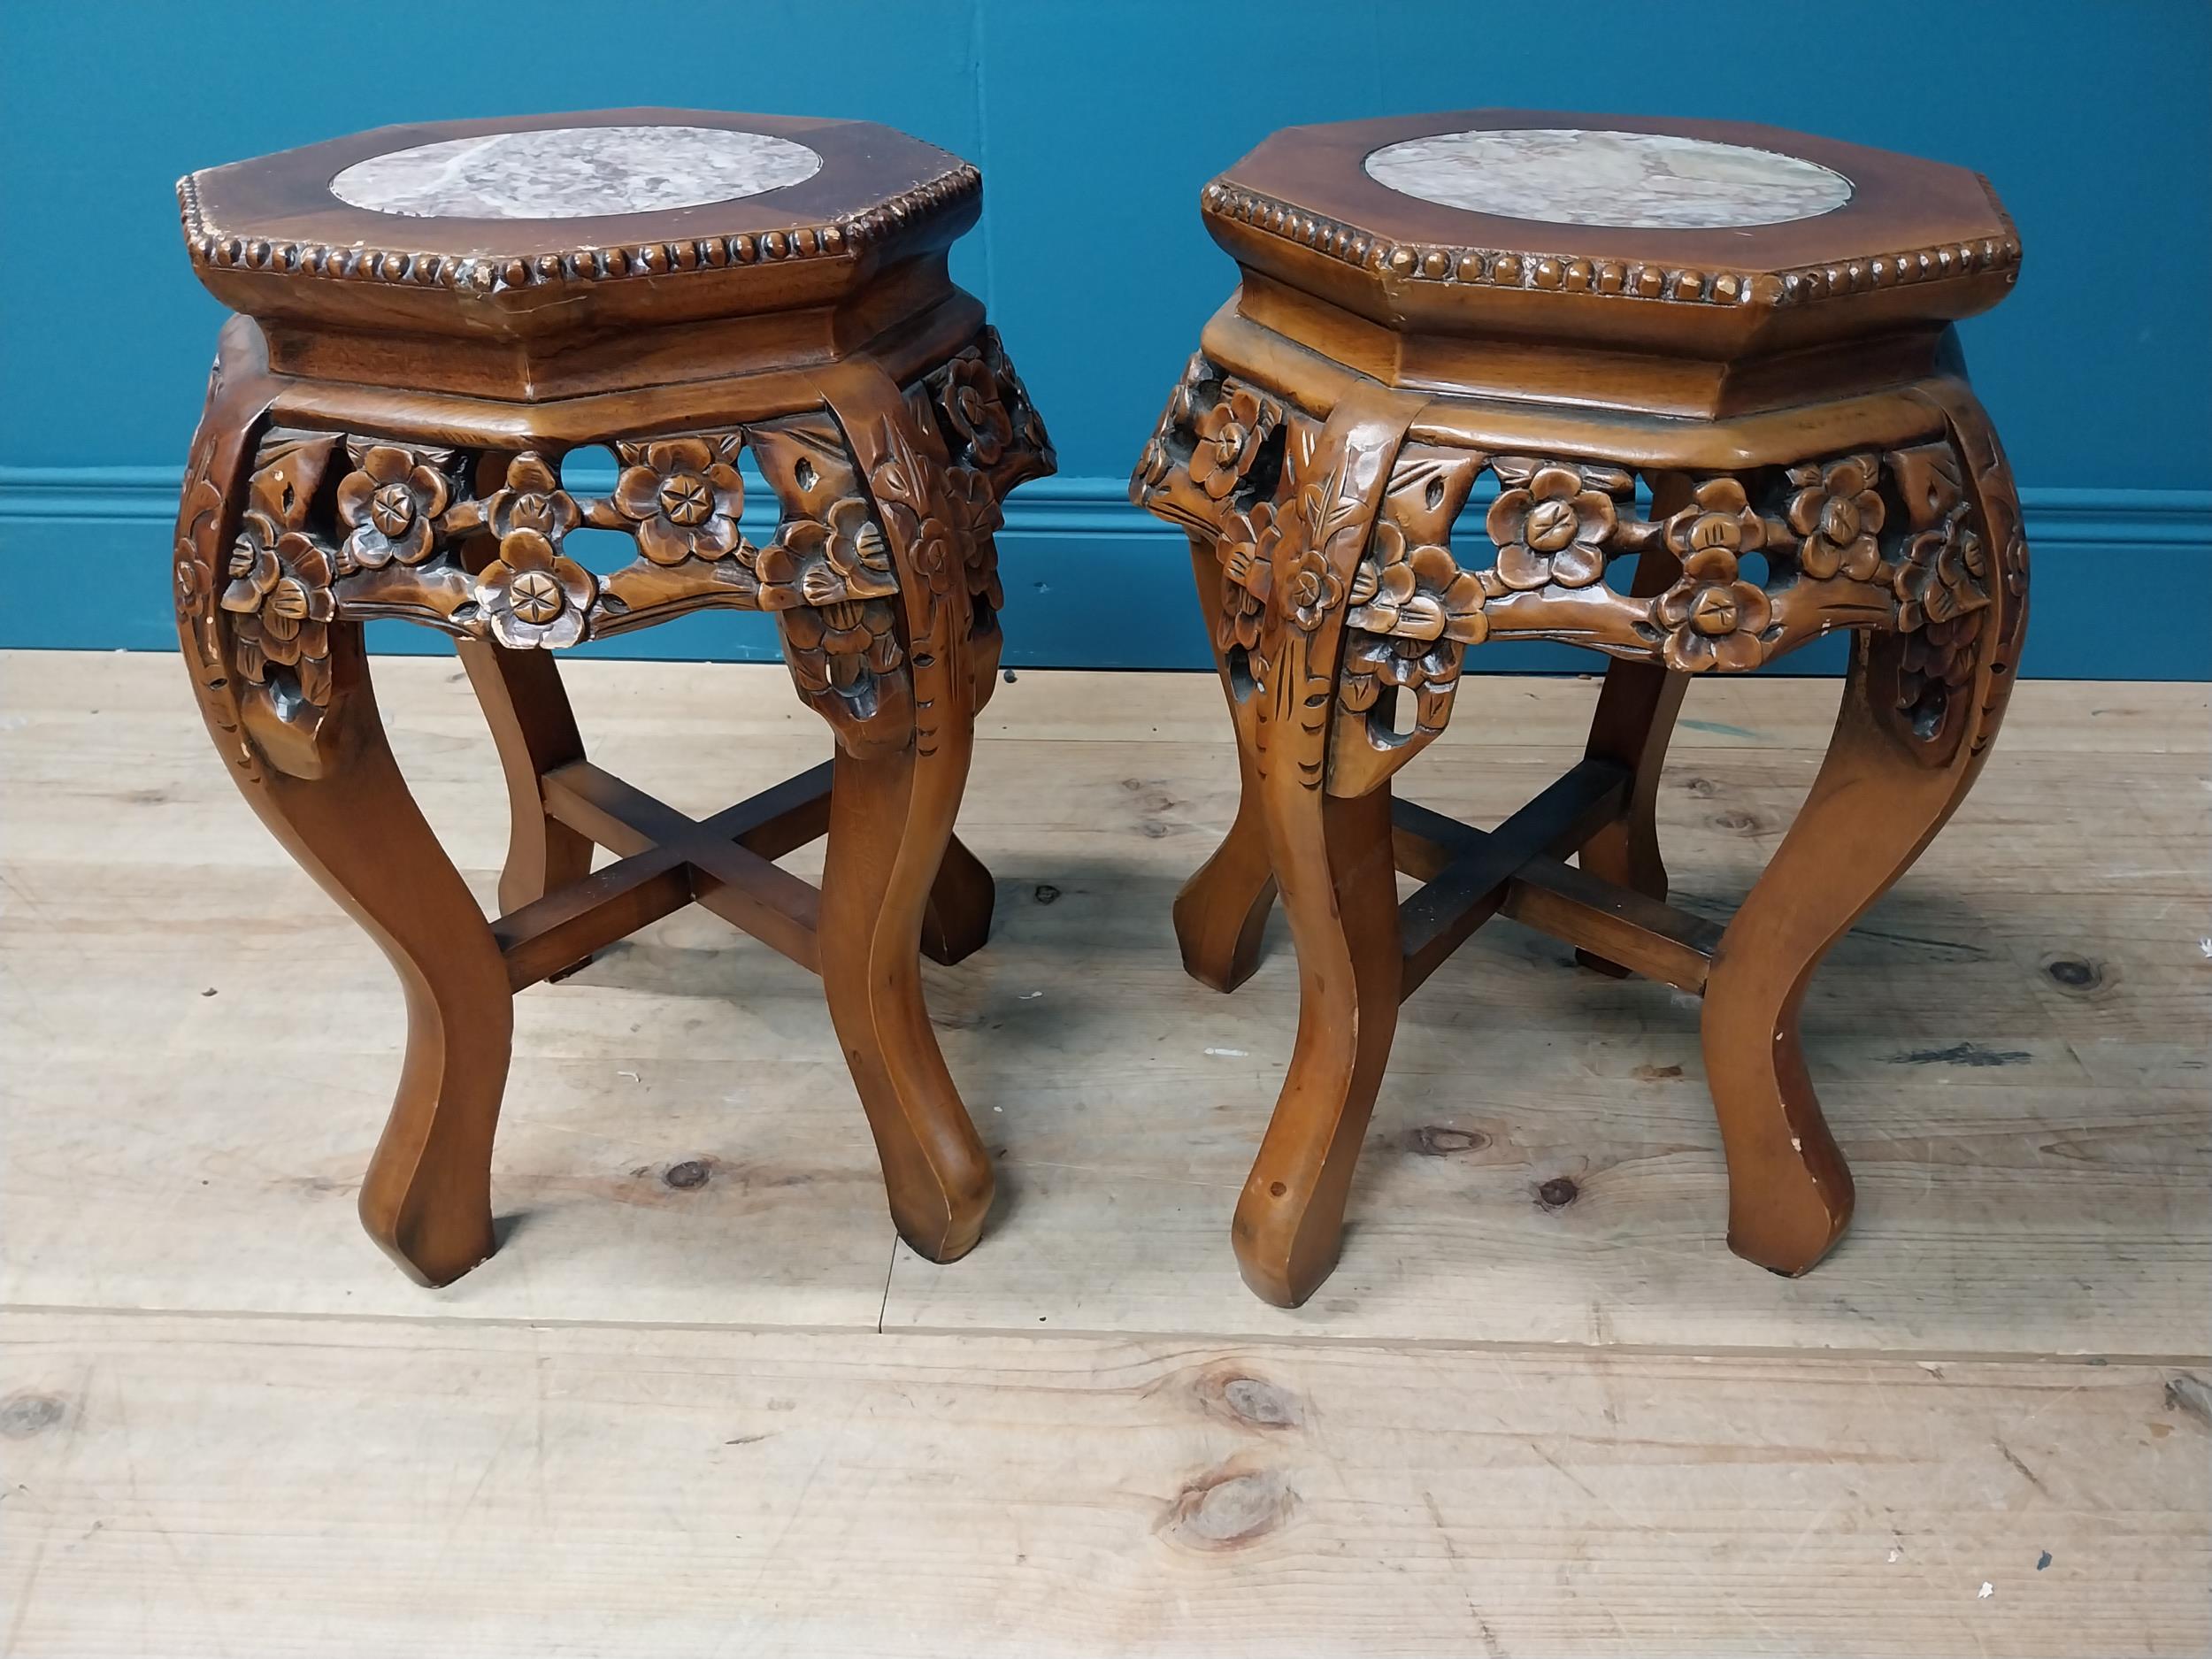 Pair of carved hardwood jardiniere stands with marble inset tops in the Chinese style. :48 cm H x 36